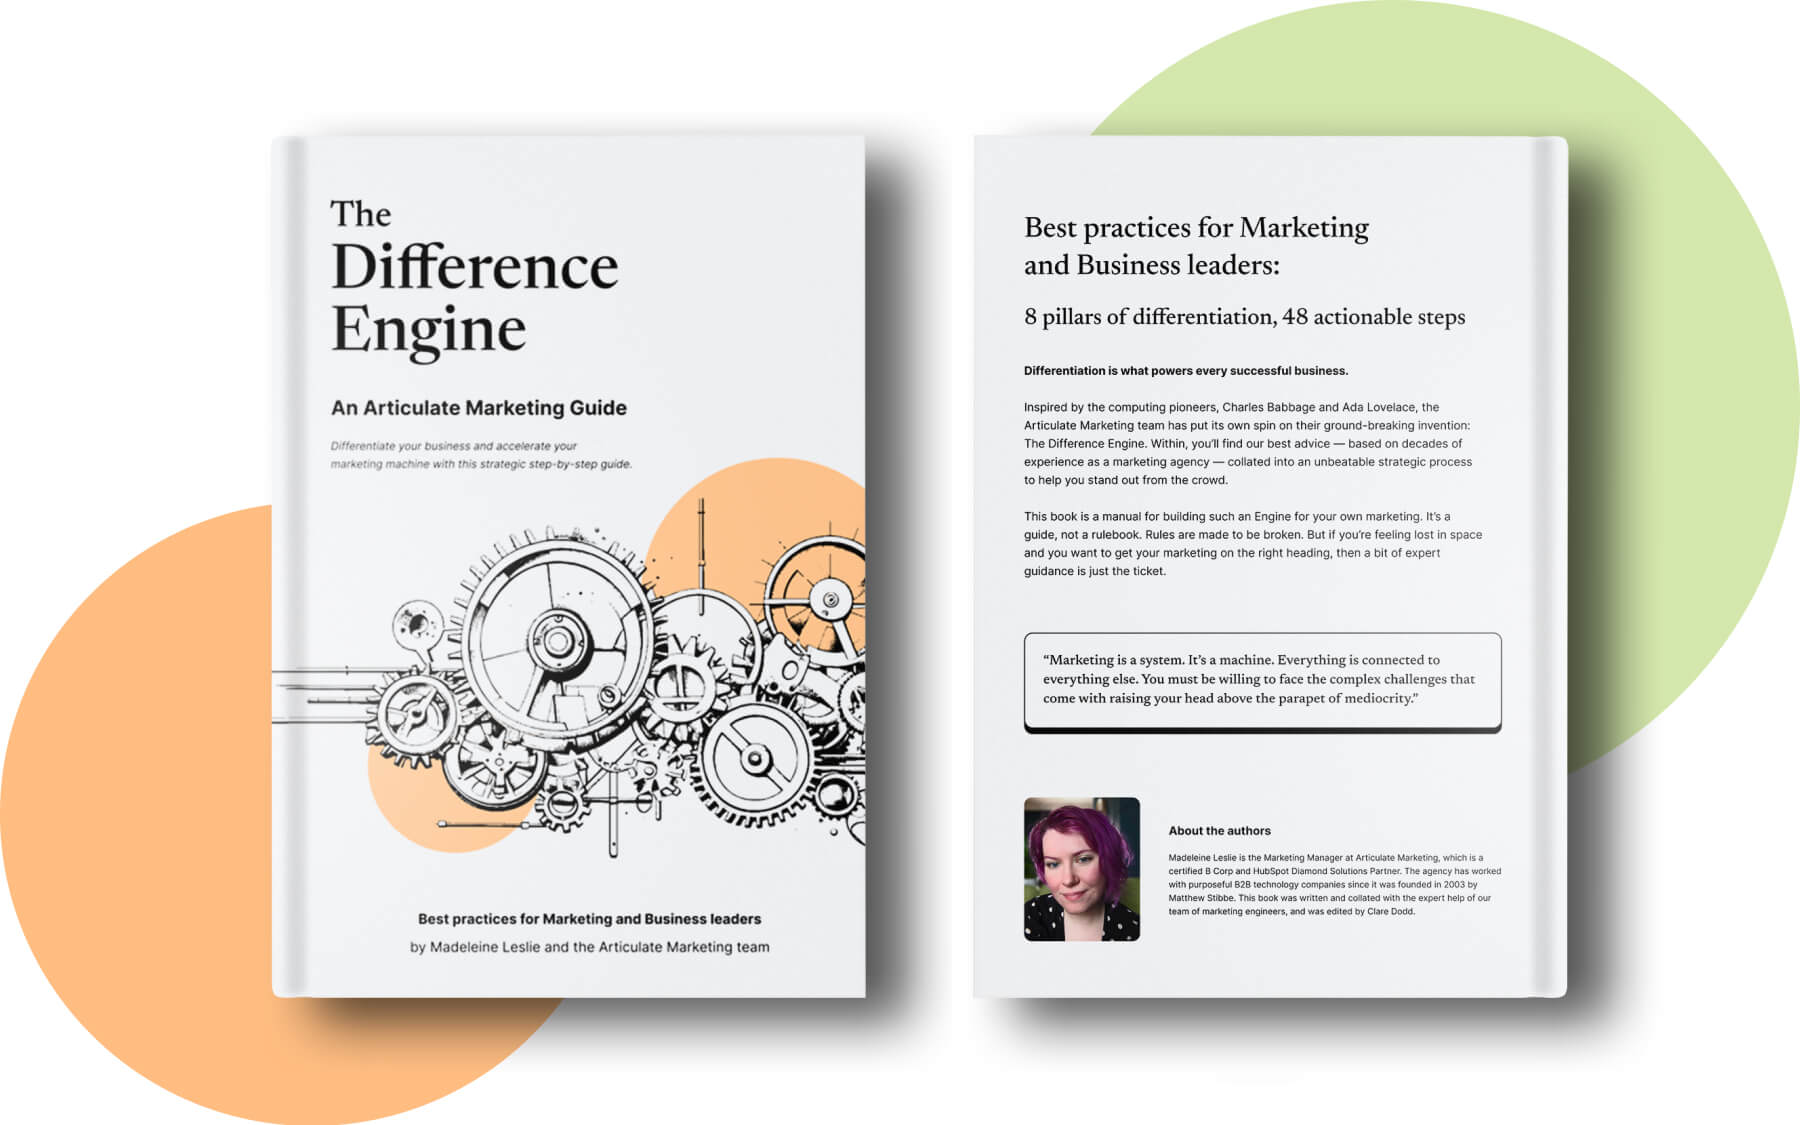 The Difference Engine: An Articulate Marketing Guide